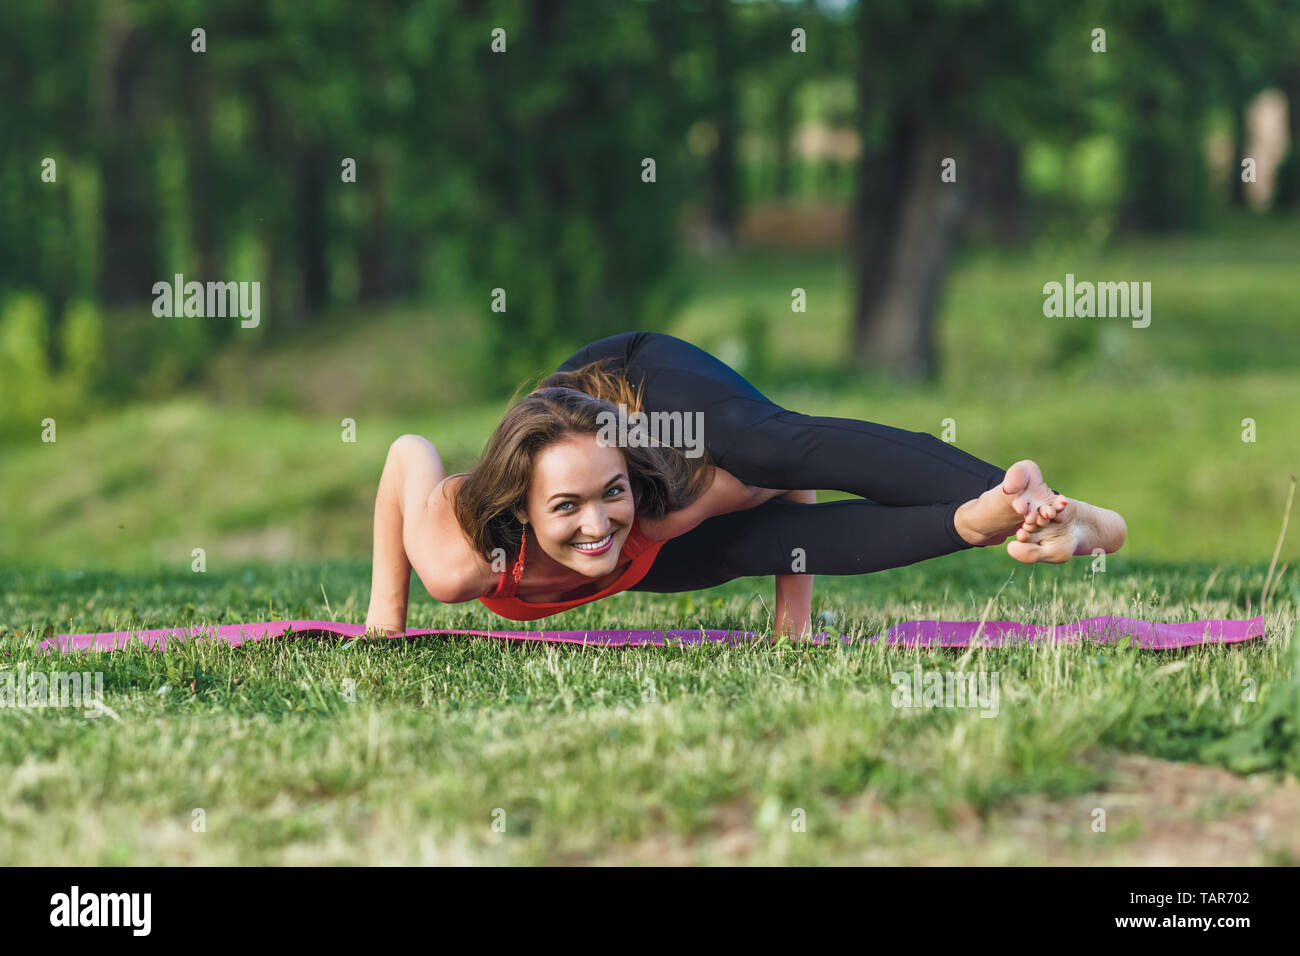 Young woman doing yoga exercises in the summer city park. Health lifestyle concept. Stock Photo